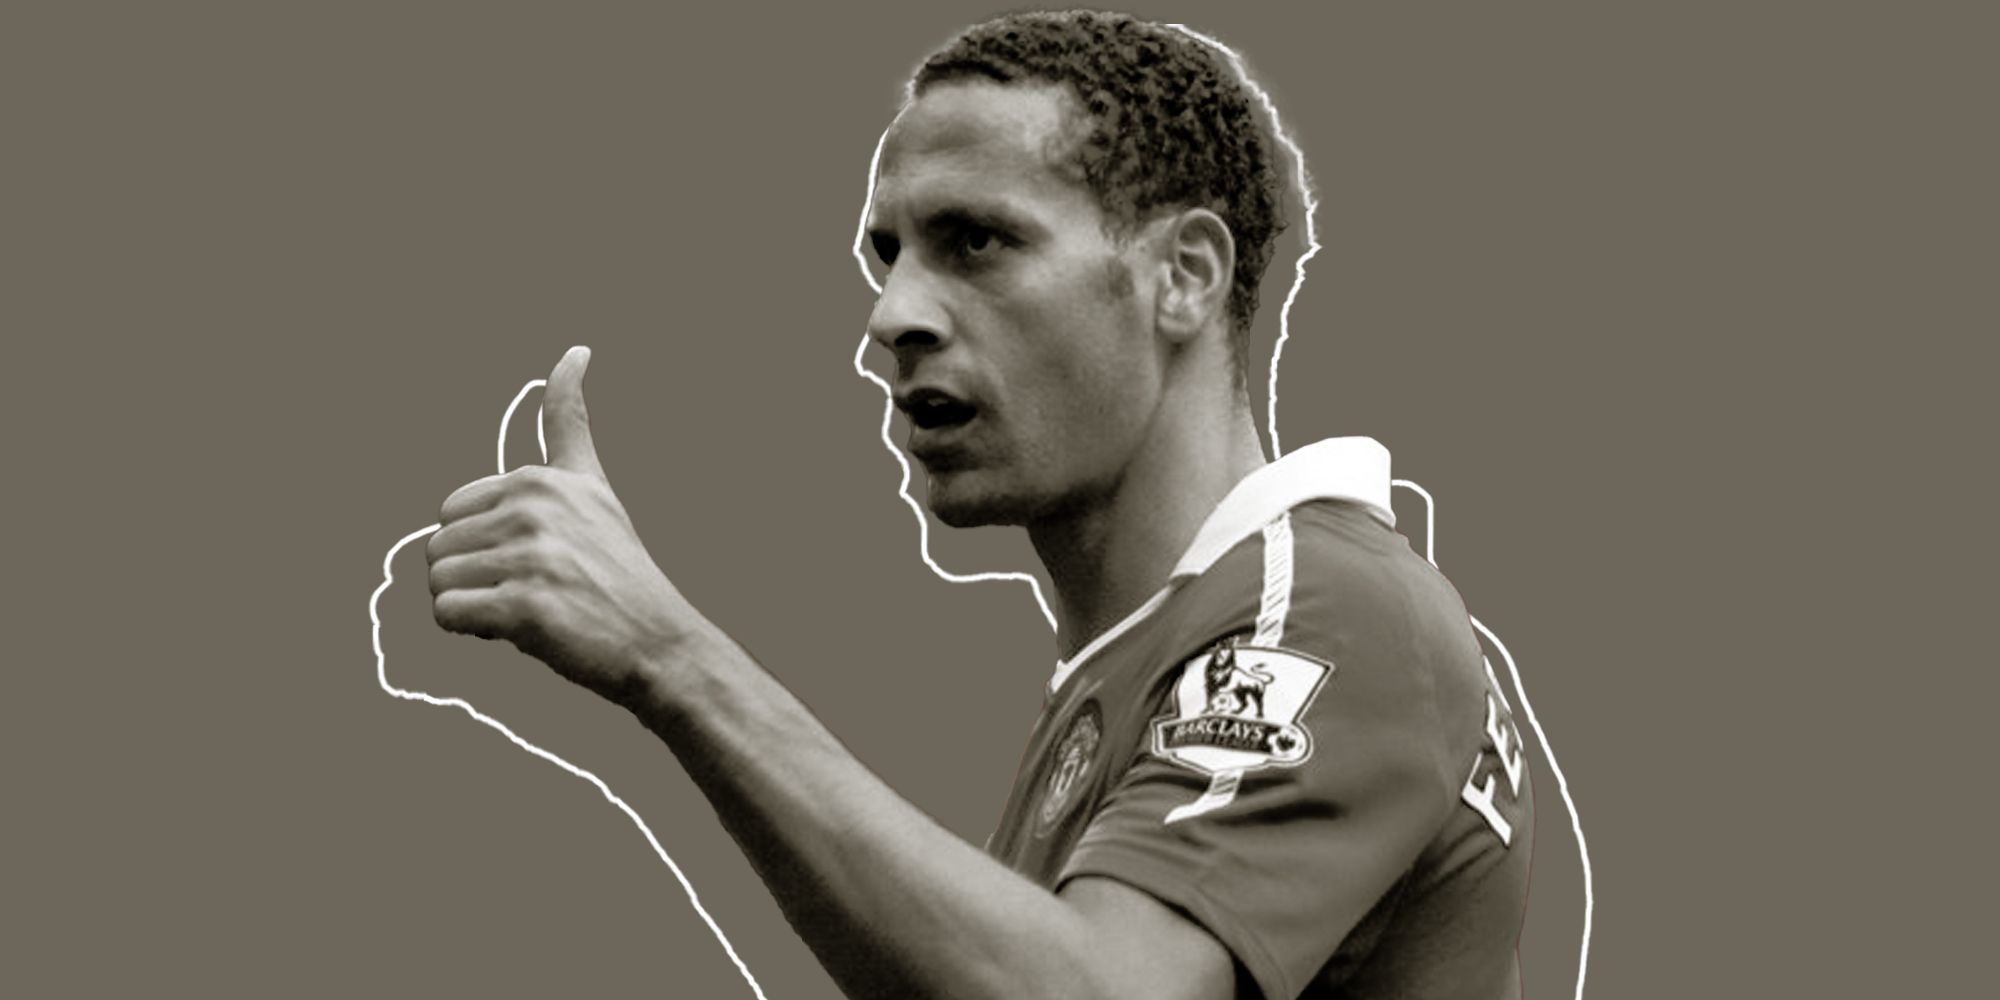 Rio Ferdinand giving a thumbs up in a side profile